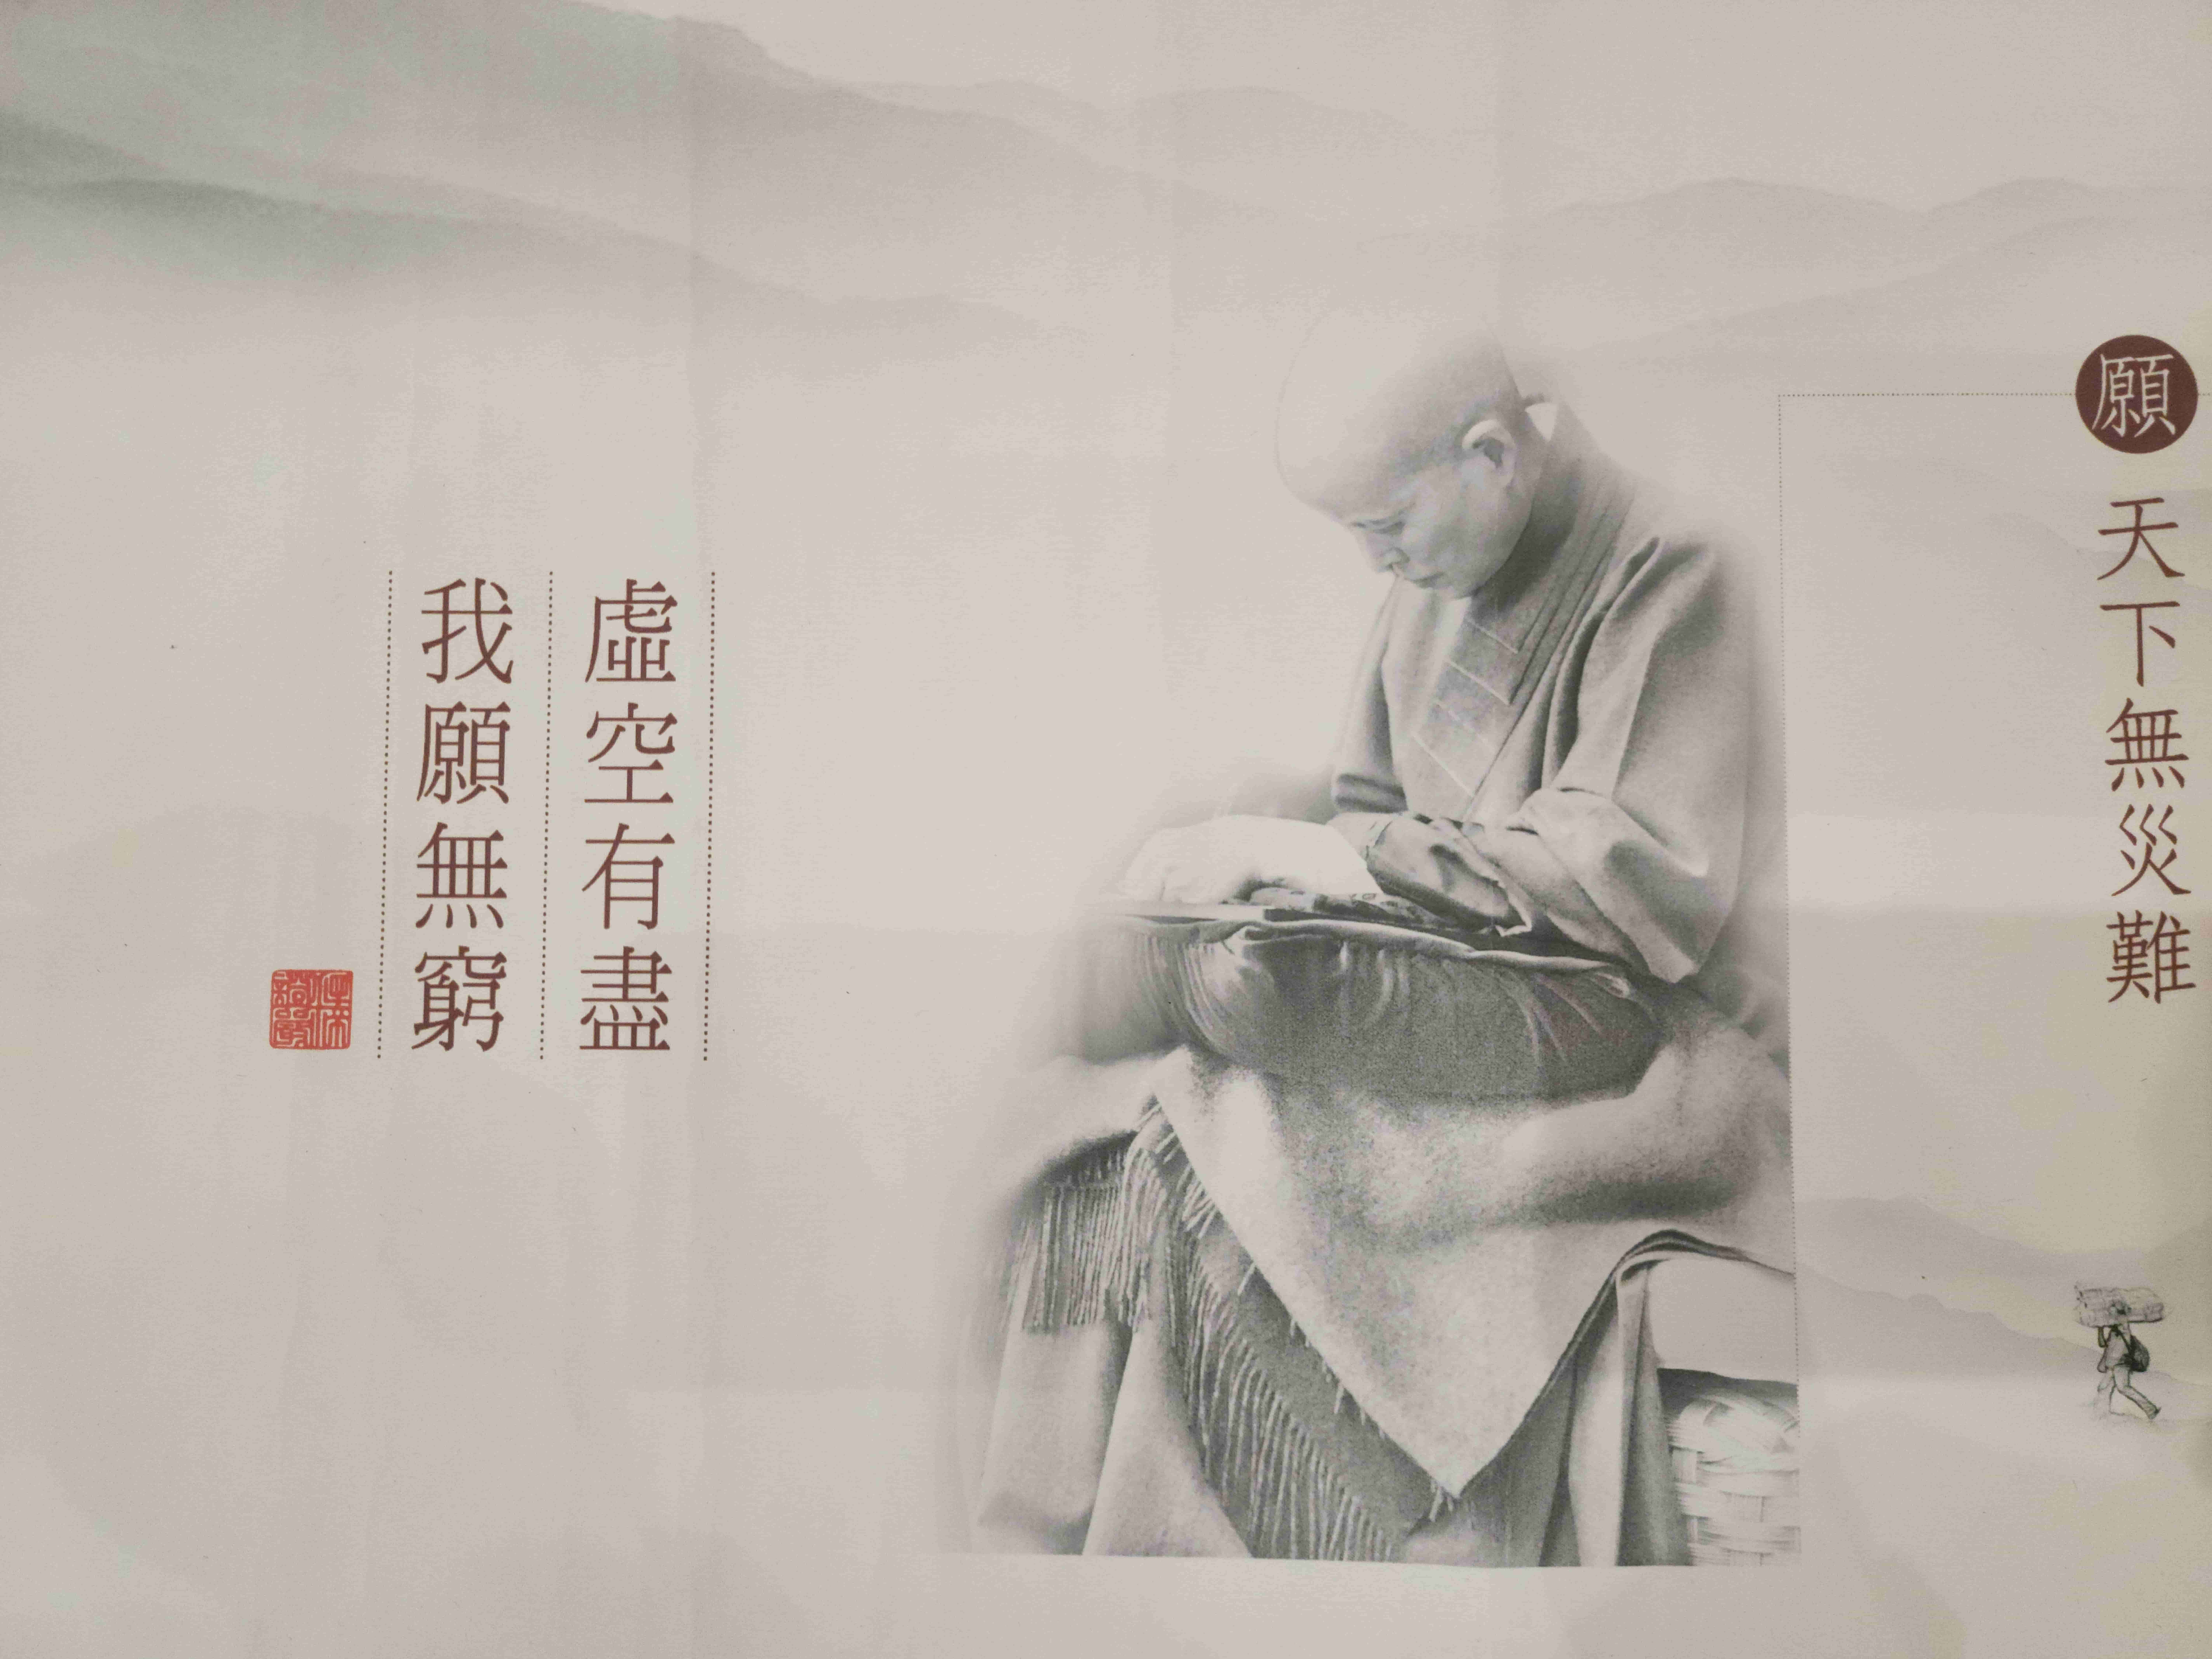 Dharma Master Cheng Yen as illustrated on the Tzu Chi scroll.